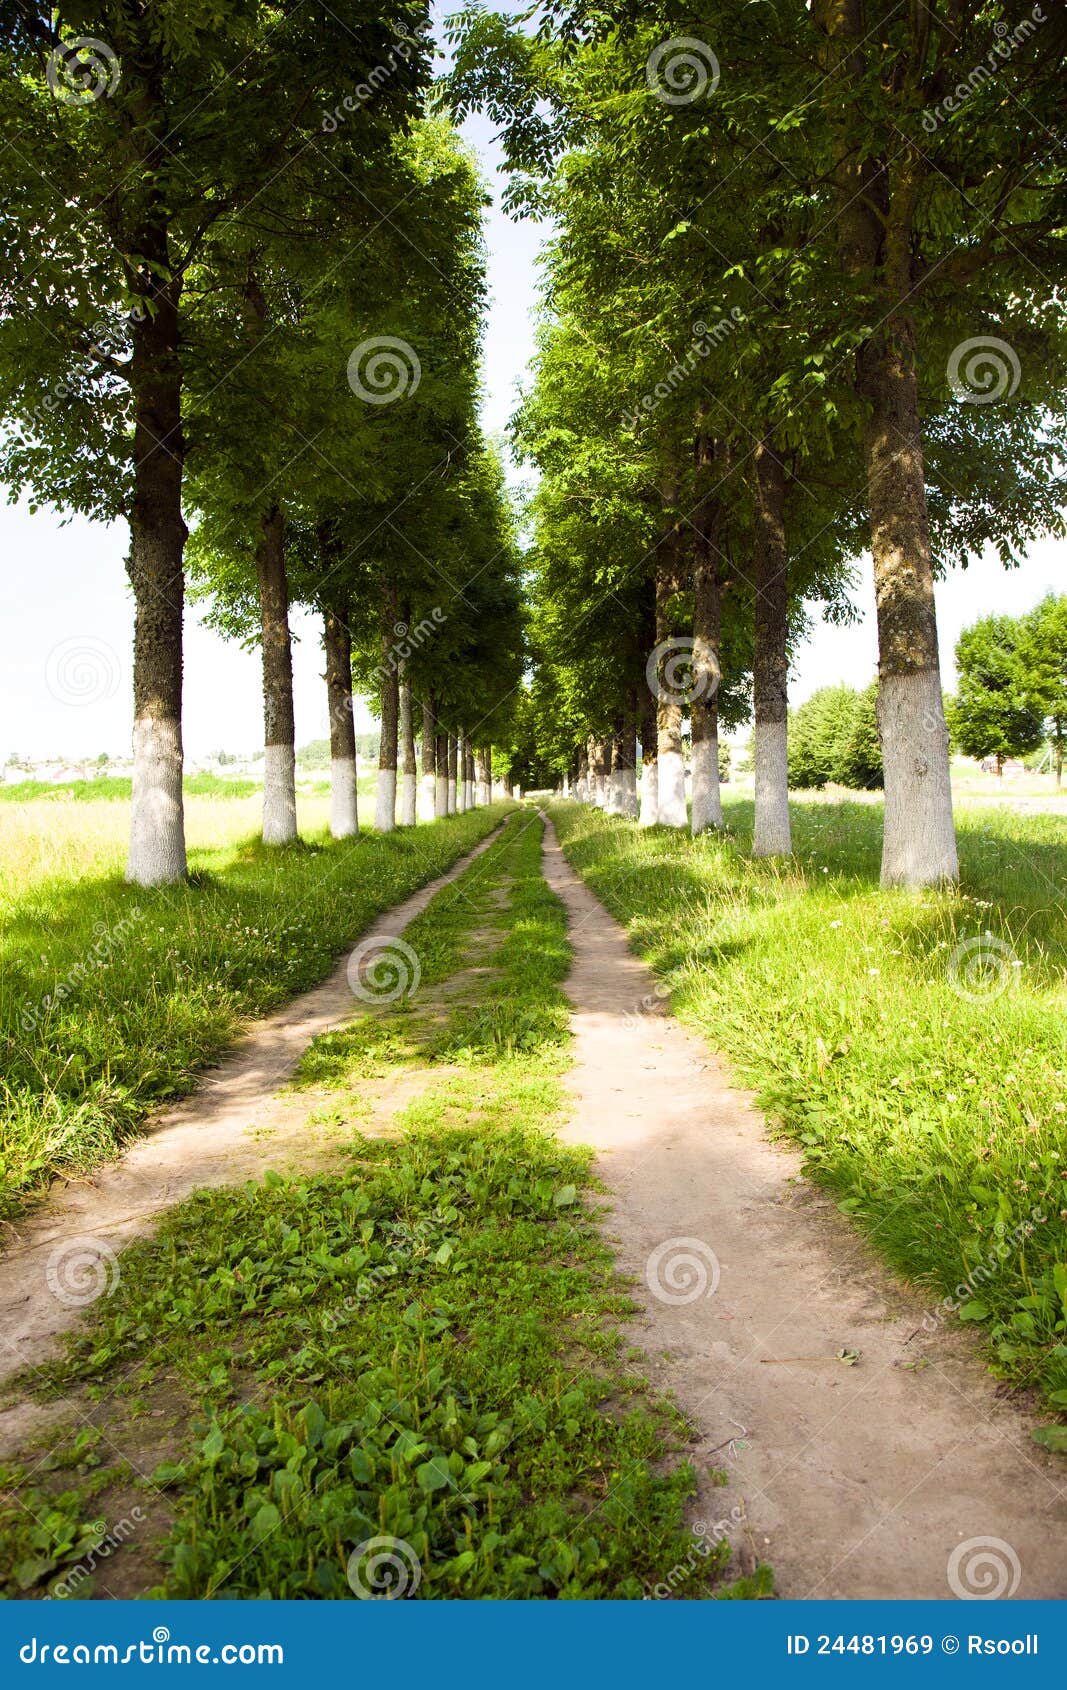 Road track stock image. Image of dirt, lush, nature, growth - 24481969